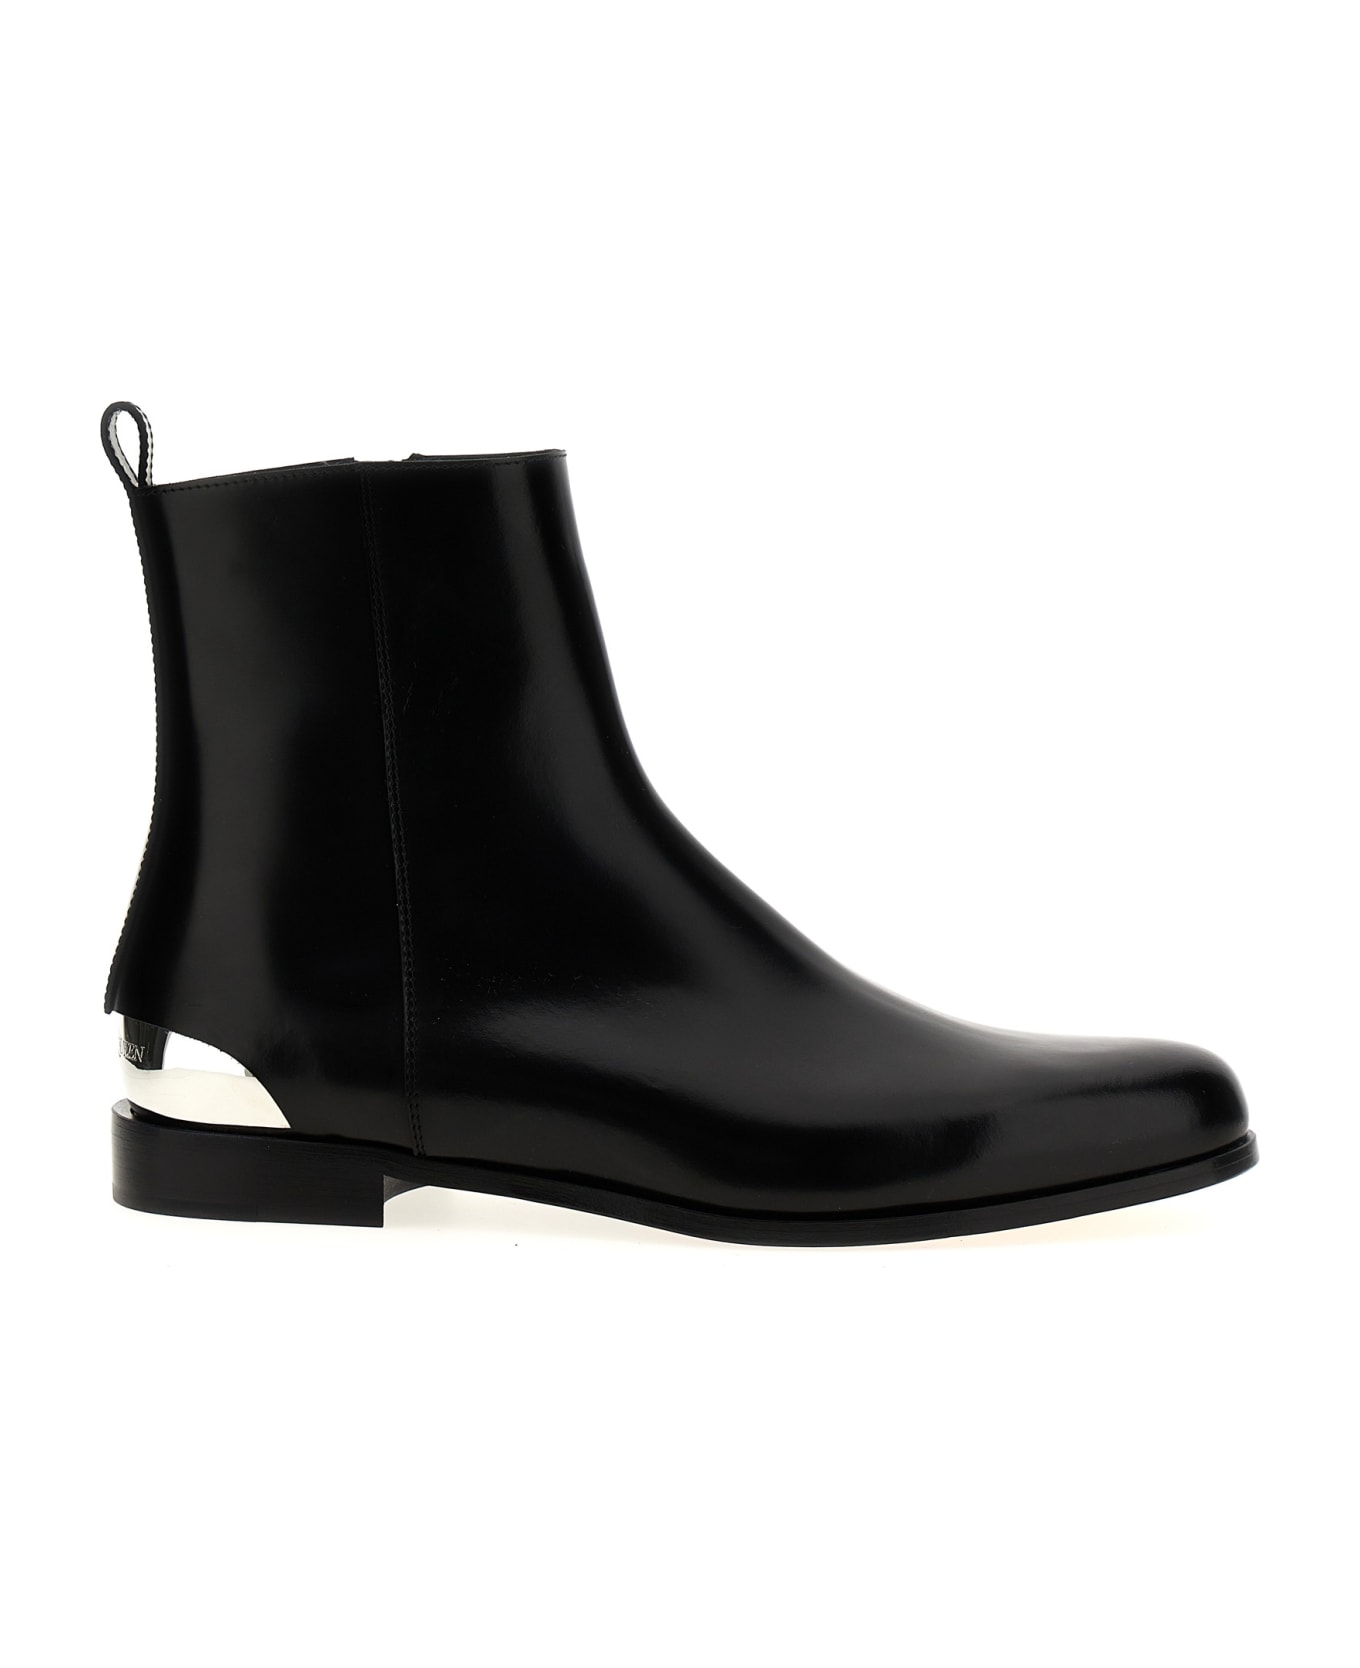 Alexander McQueen Ankle Boots - Black ブーツ